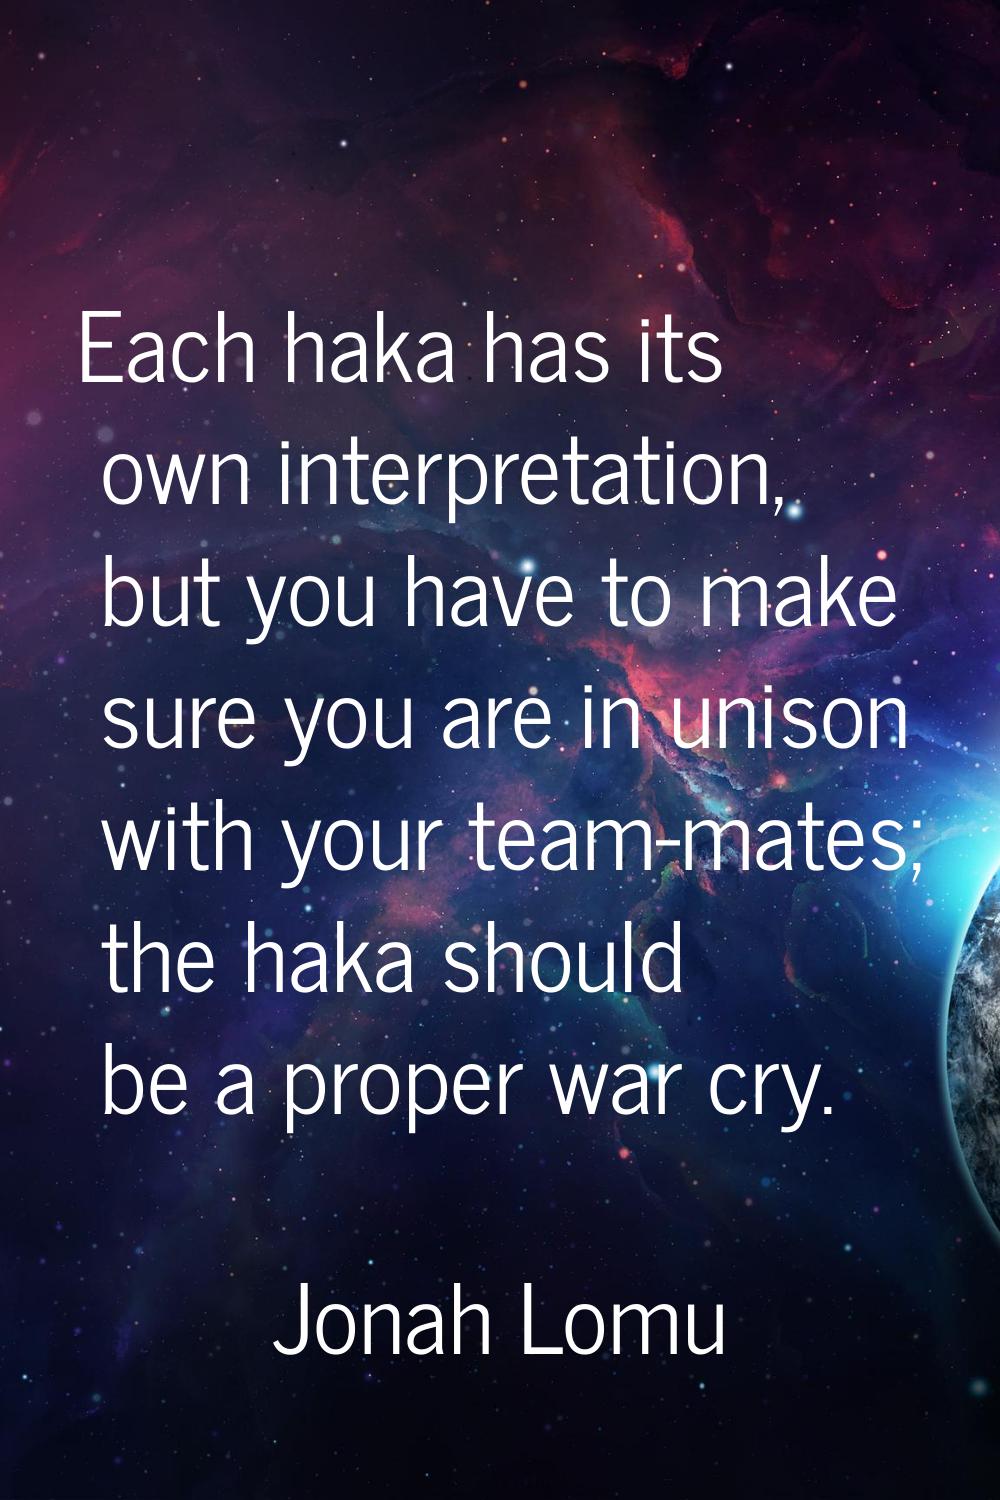 Each haka has its own interpretation, but you have to make sure you are in unison with your team-ma